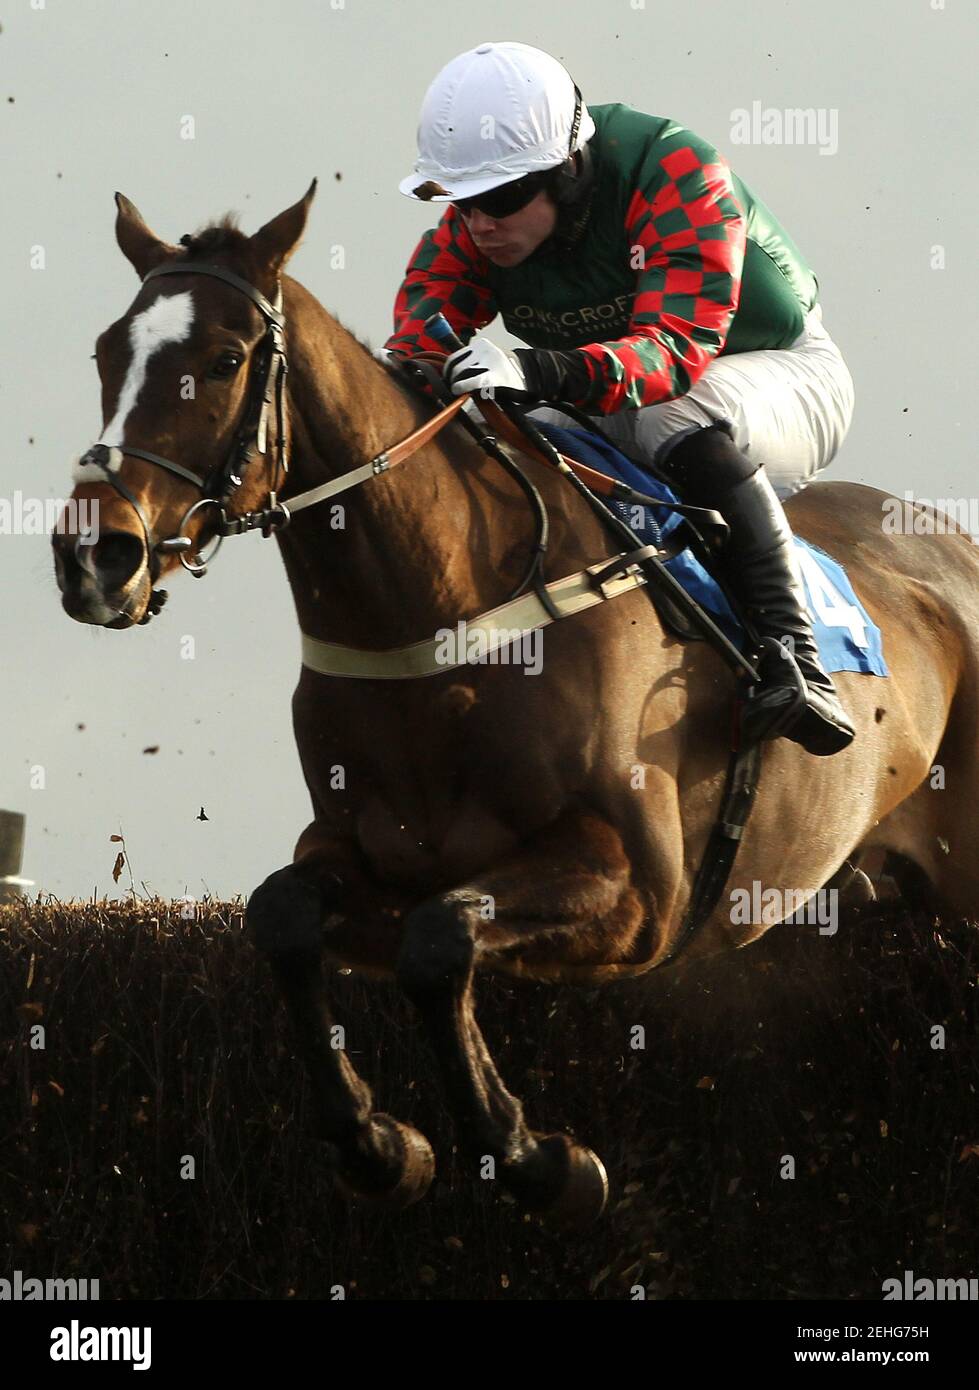 Horse Racing - Taunton  - Taunton Racecourse - 3/3/11  Laneguy ridden by Denis O'Regan clears a fence before going on to win the 15.50 The southwest-racing.co.uk Novices' Handicap Steeple Chase Race  Mandatory Credit: Action Images / Julian Herbert  Livepic Stock Photo